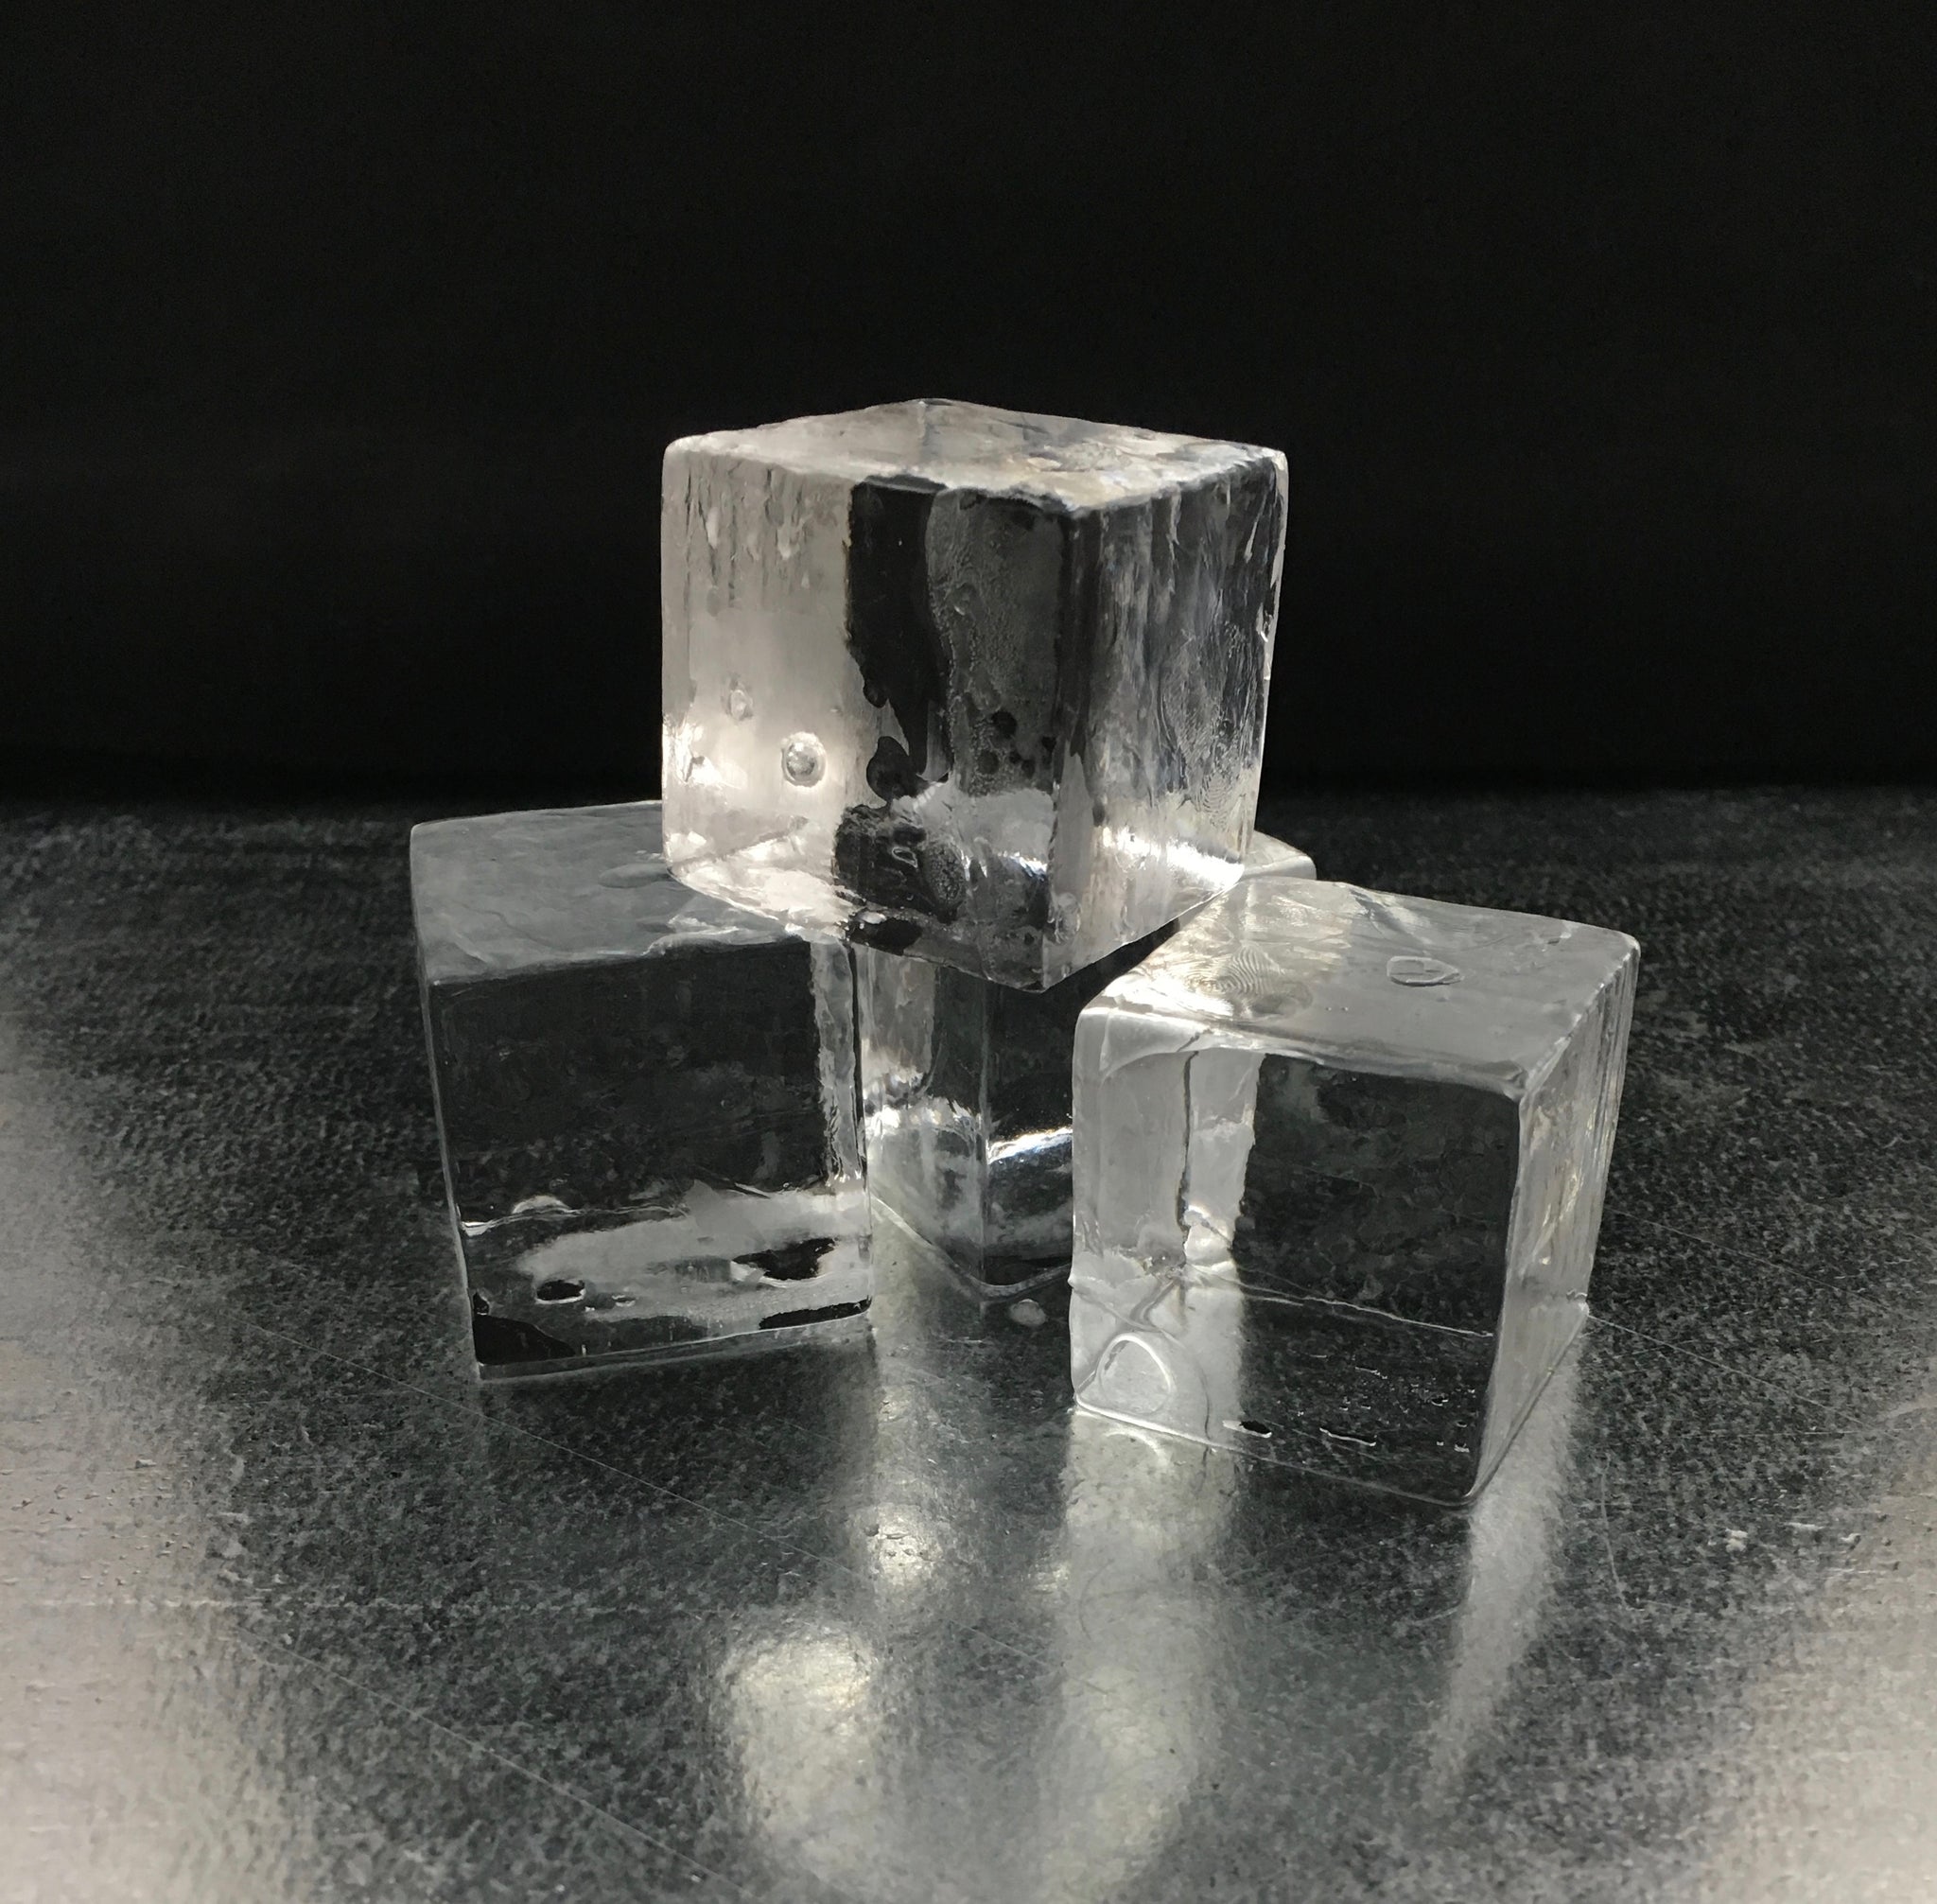 How to Make Clear Ice at Home – Siligrams